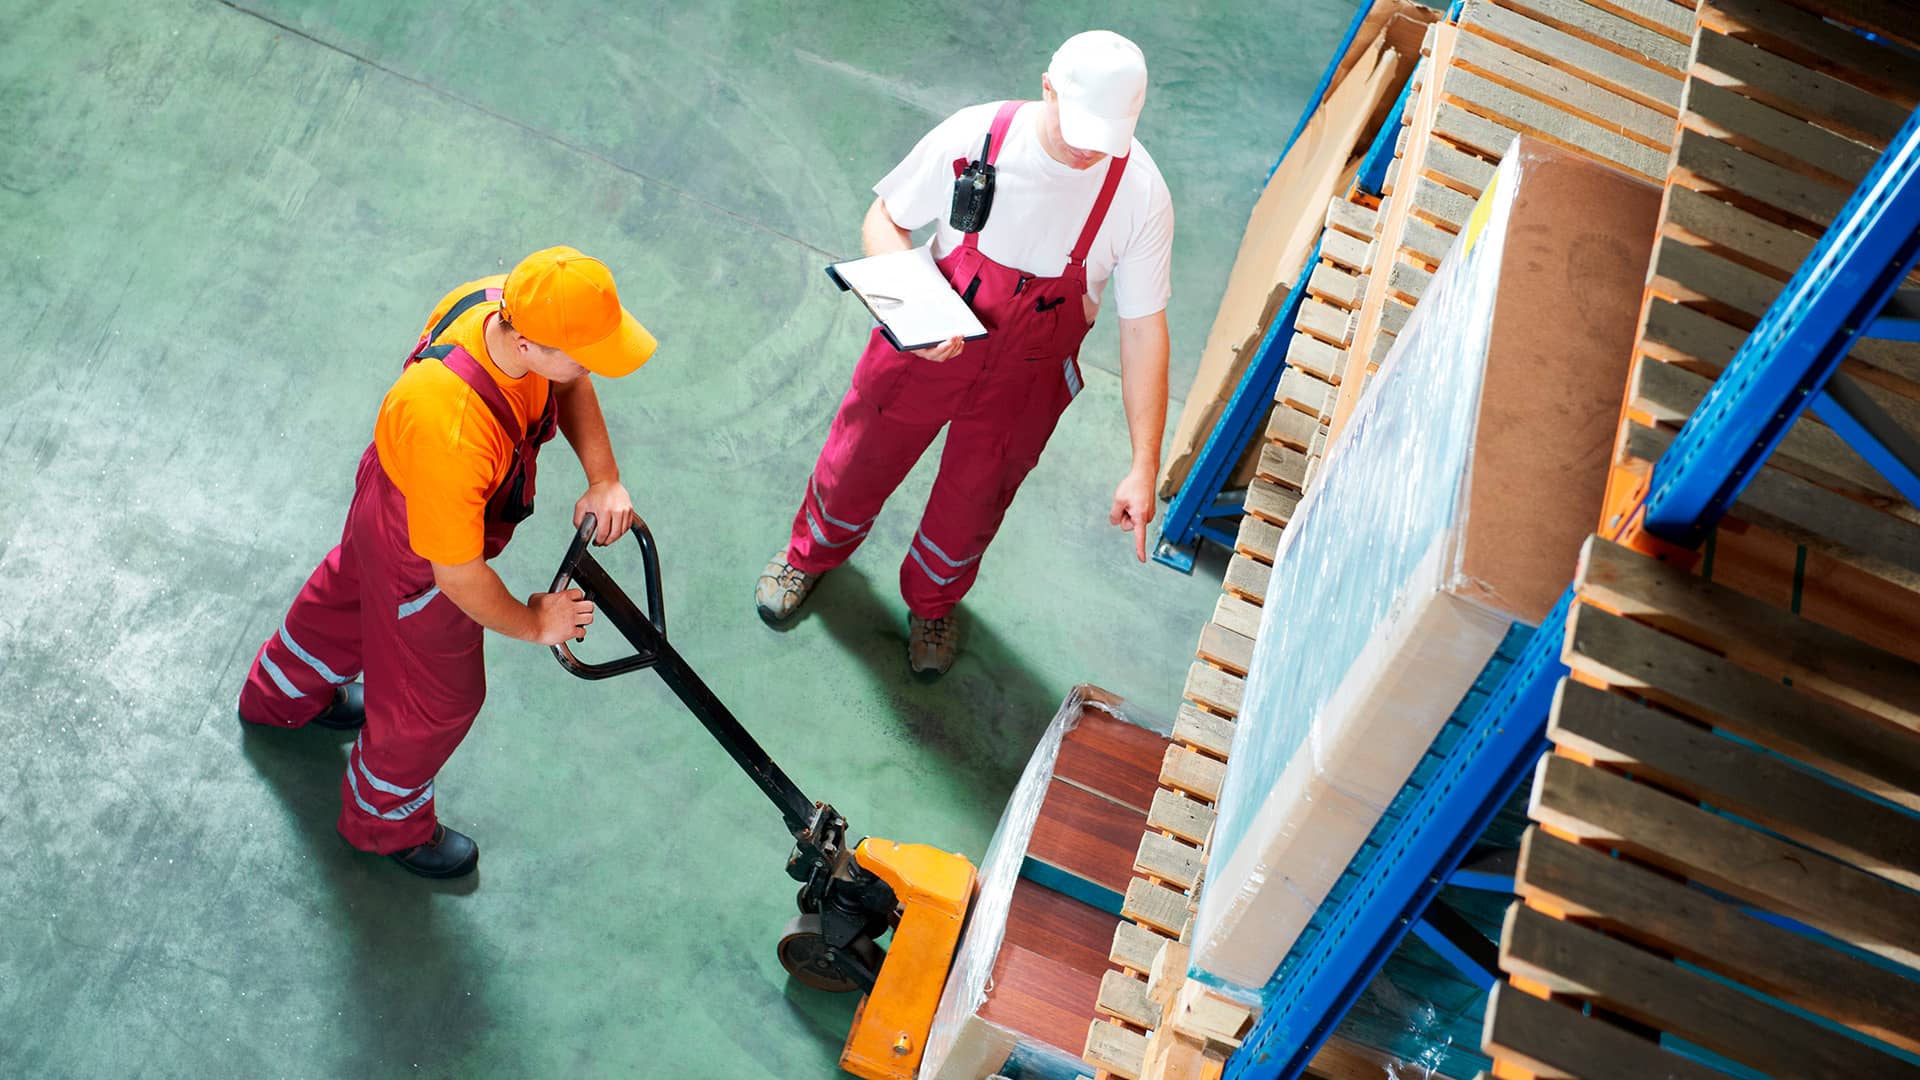 How warehouse storage management can optimize your workforce